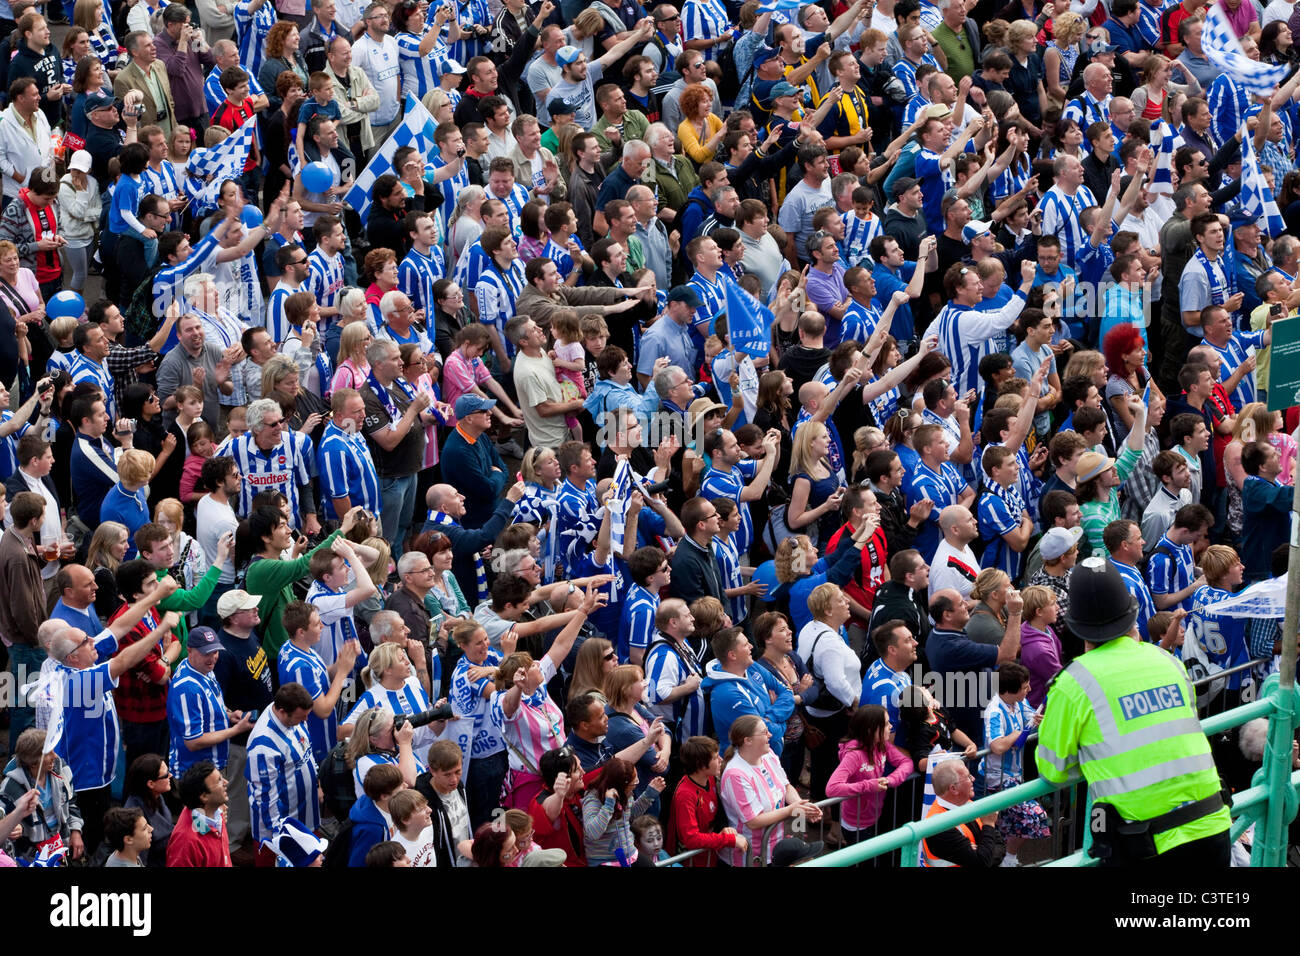 brighton-and-hove-albion-football-supporters-cheer-the-team-during-C3TE19.jpg